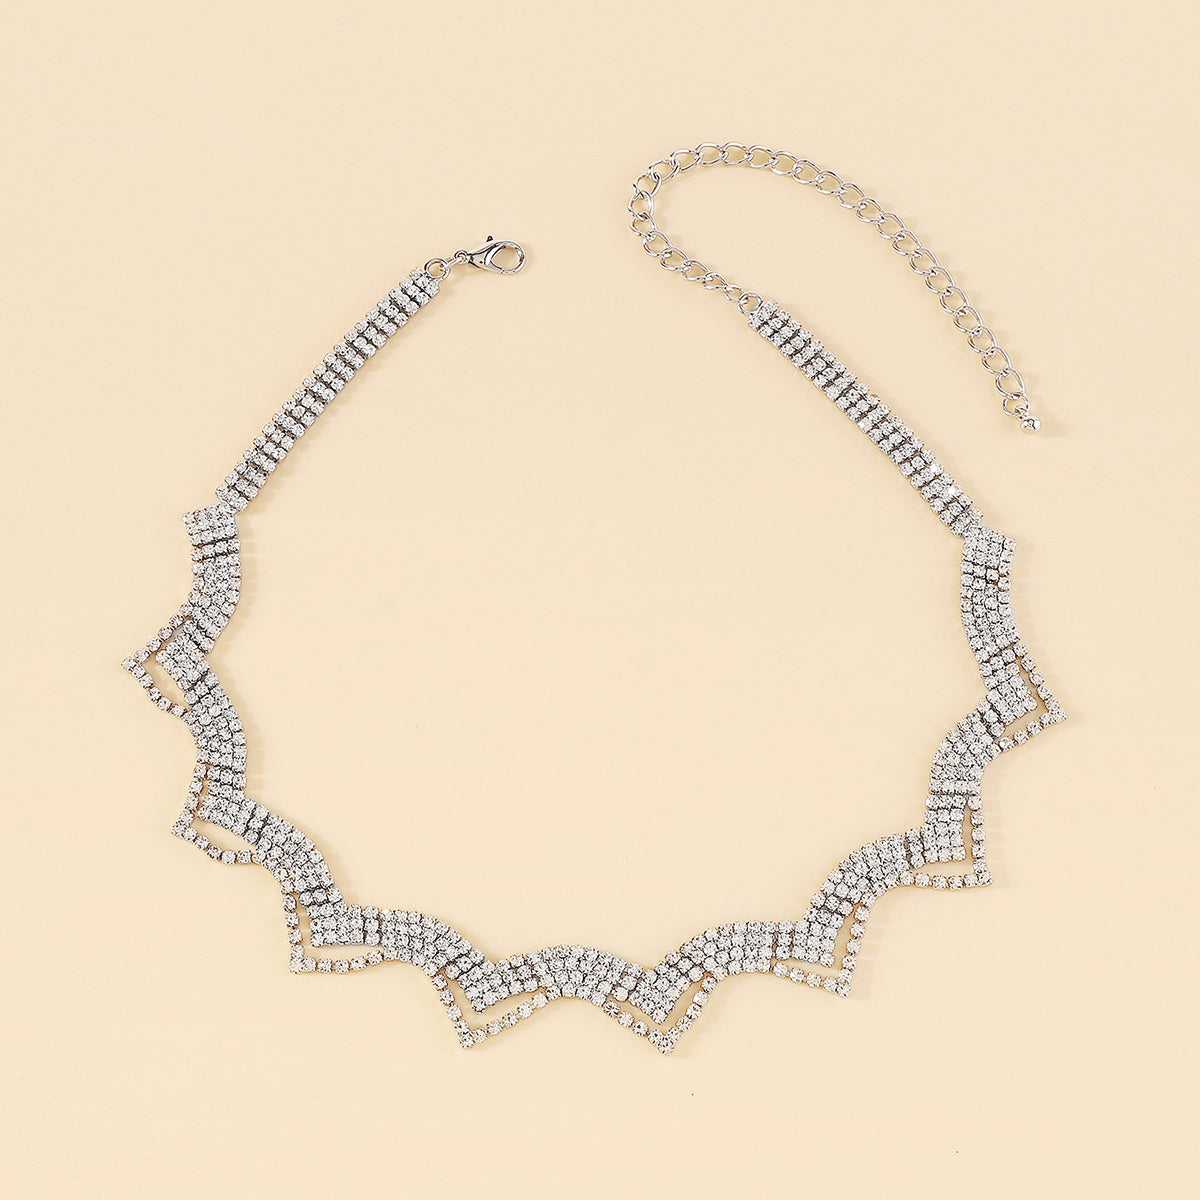 N11385 Lux Glam Choker Necklace